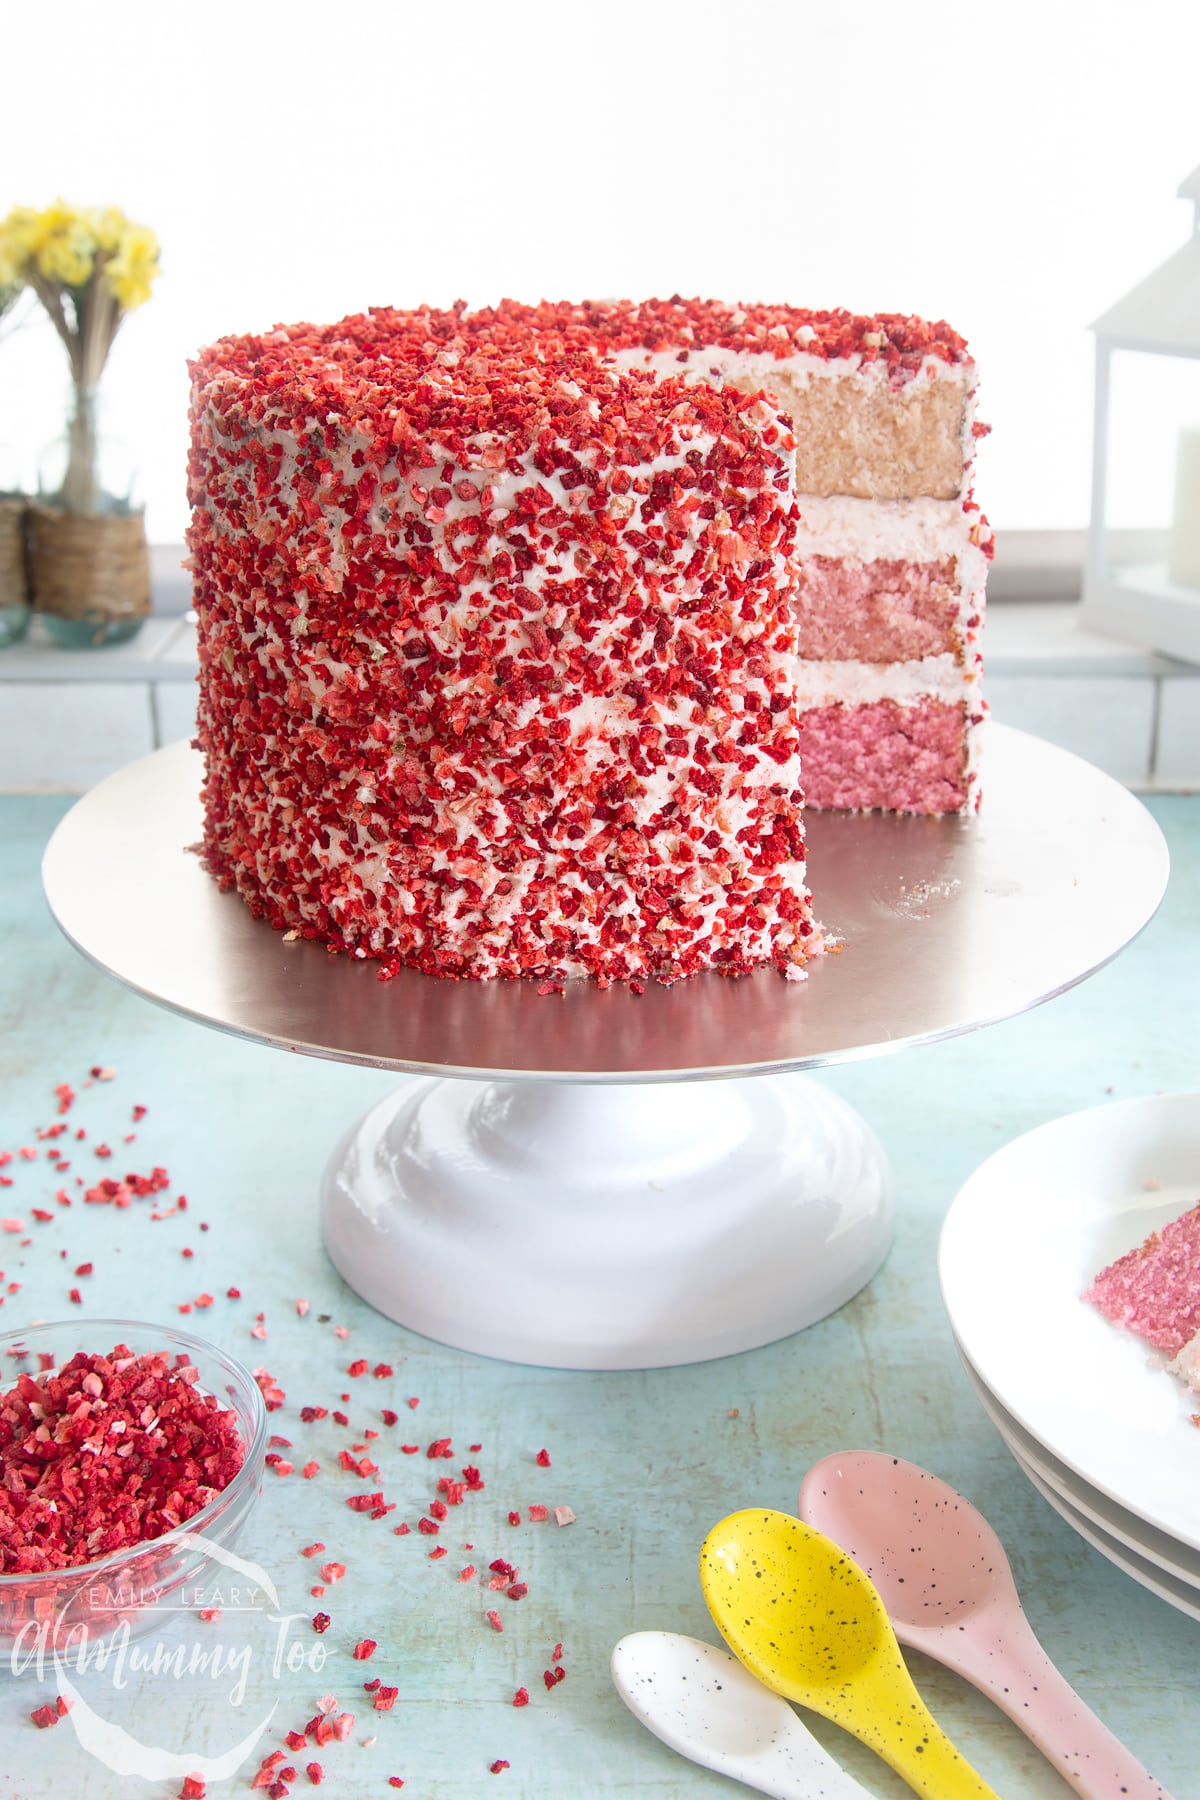 A pink ombre cake on a cake stand. The cake has three layers, each an increasingly intense shade of pink. The sponges are layered with pale pink frosting and the outside is decorated with freeze dried strawberry pieces. 